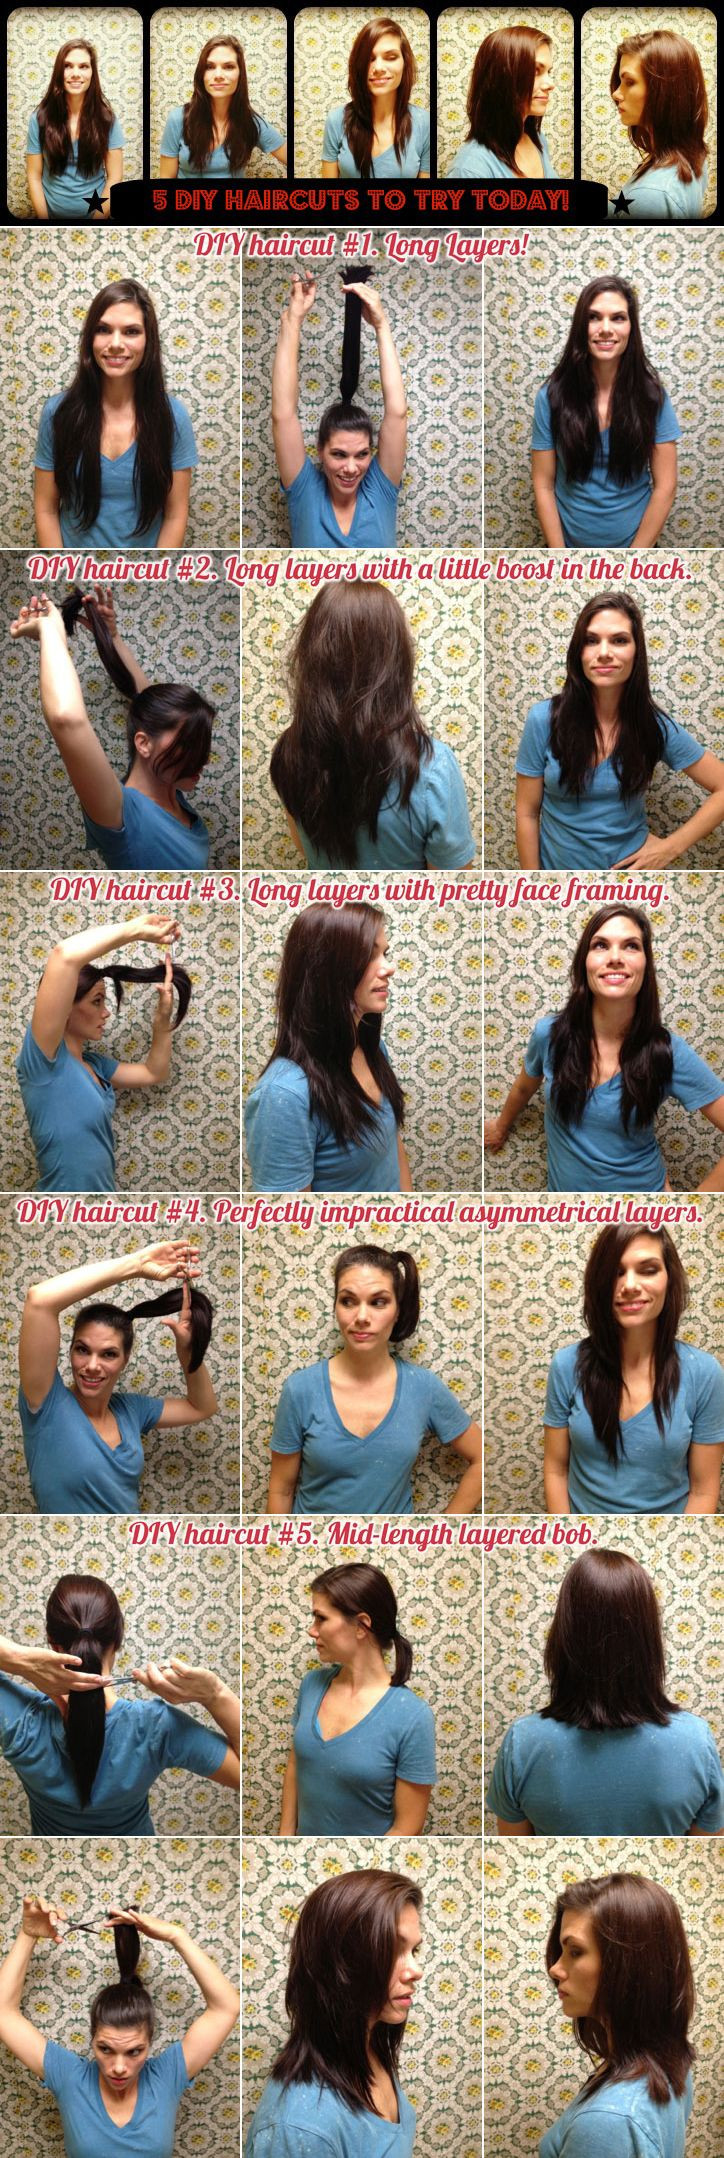 DIY Long Haircut
 5 DIY HAIRCUTS to try today CLICK for instructions from